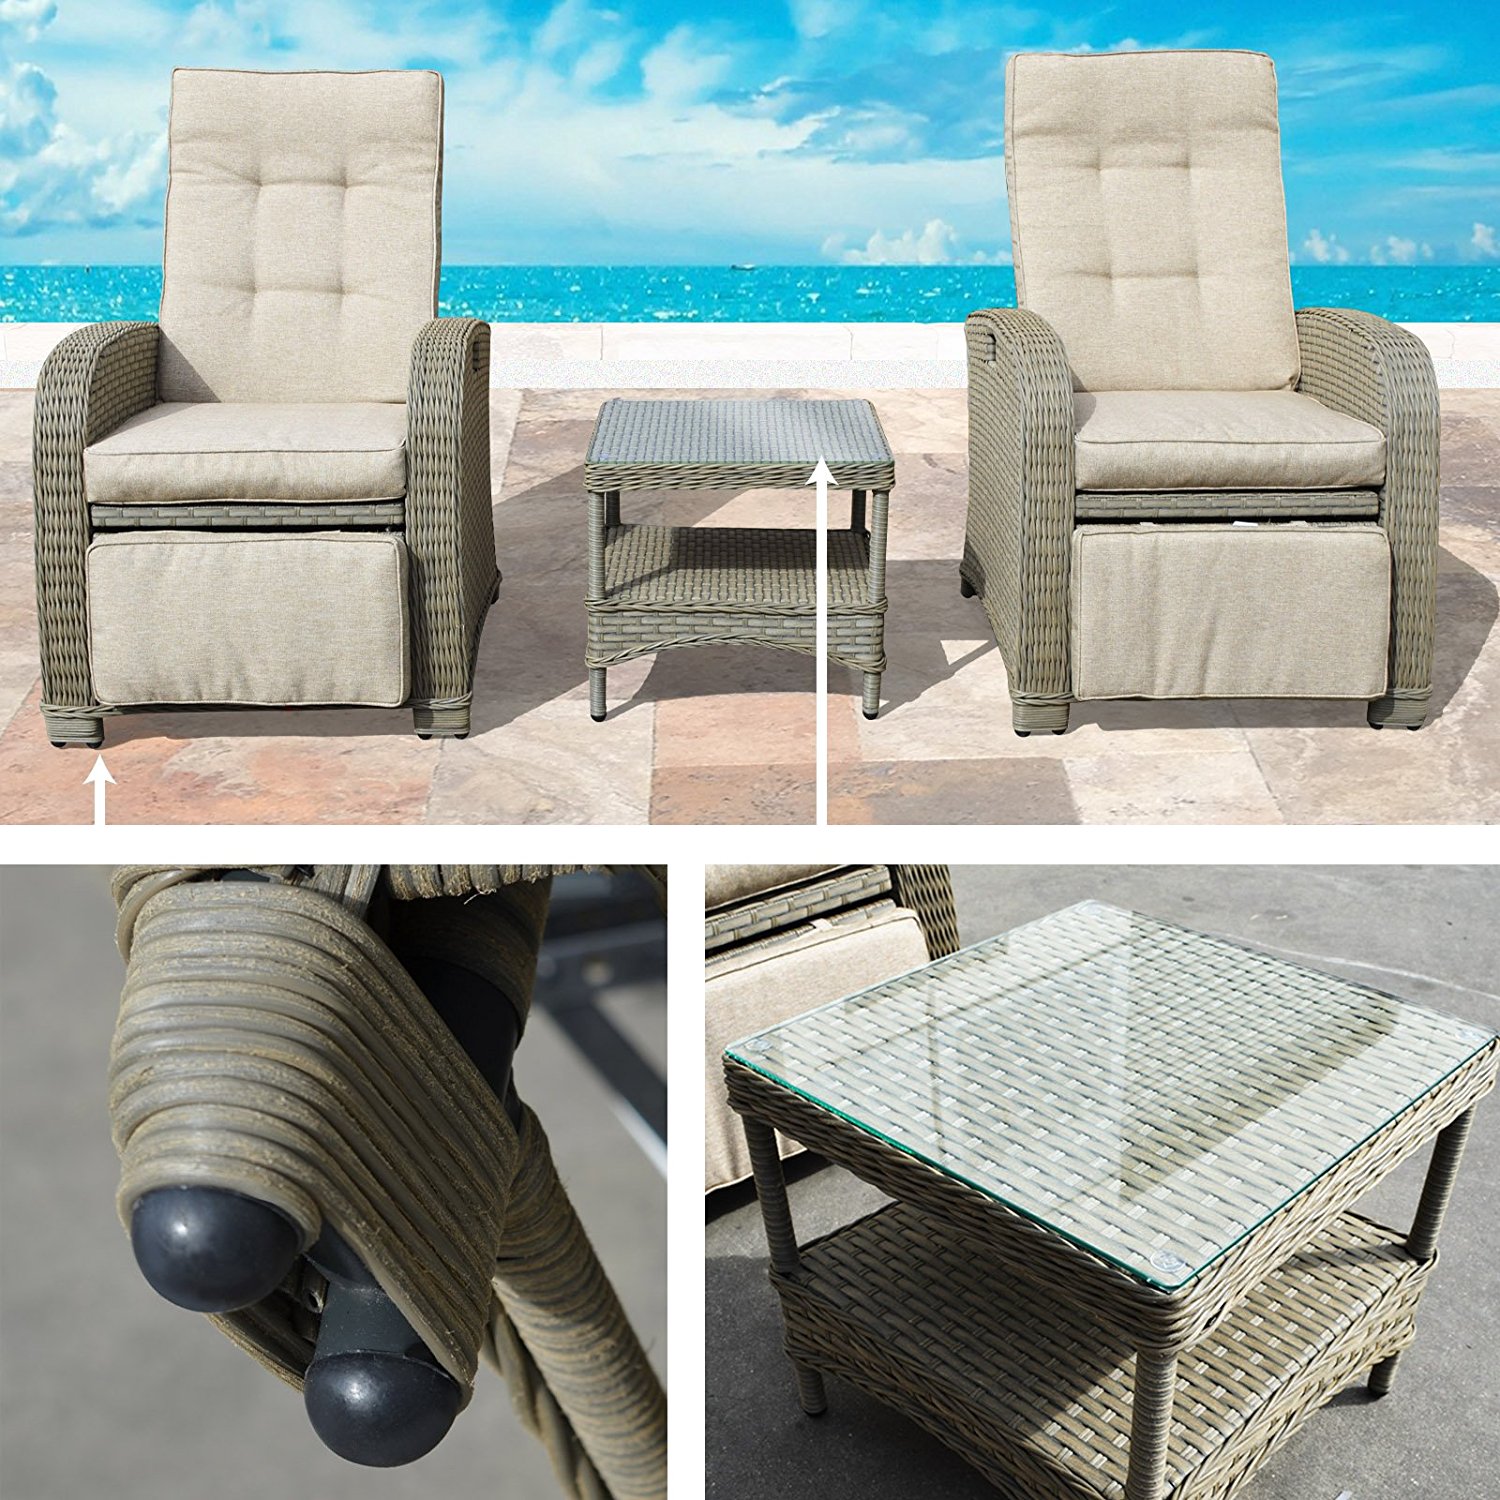 Sunny 3pcs Wicker Rattan Lounge Table & Chair Set Patio Furniture Outdoor Garden With Cushion Seat - image 4 of 6